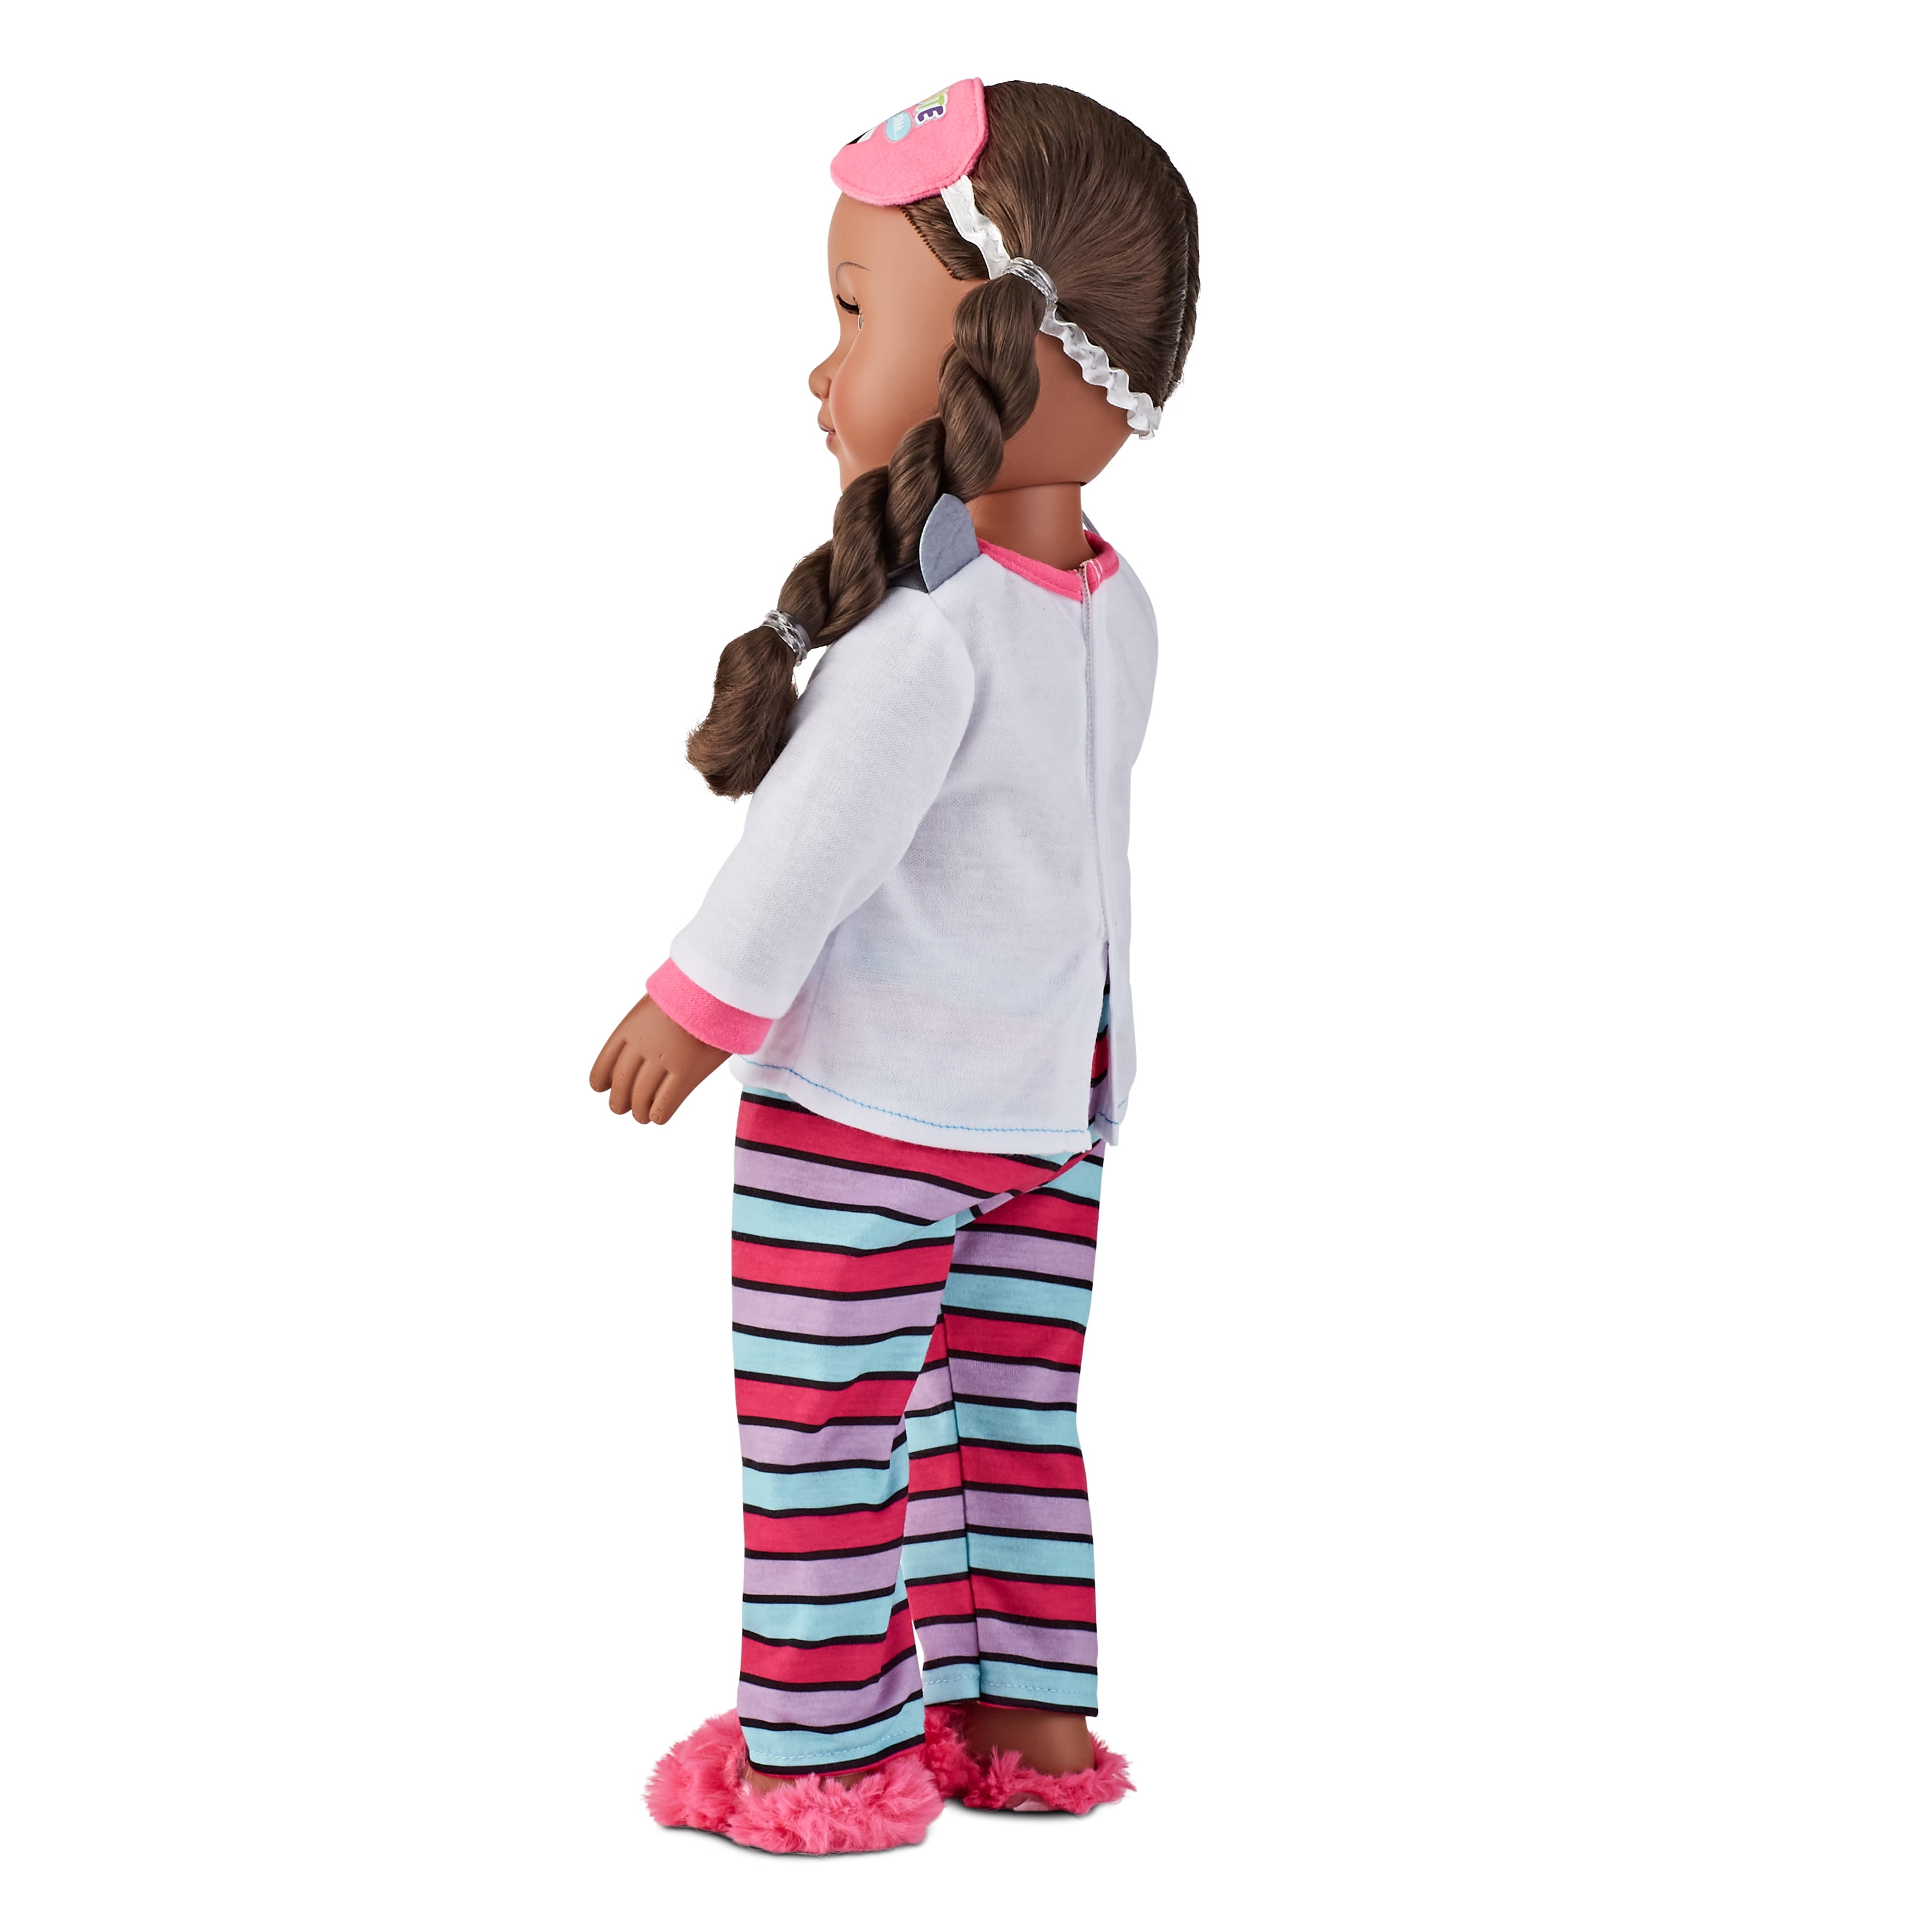 Maddie SnapDolls Cloth Dress Up Paper Dolls for Pretend Play and Hand Eye Coordination